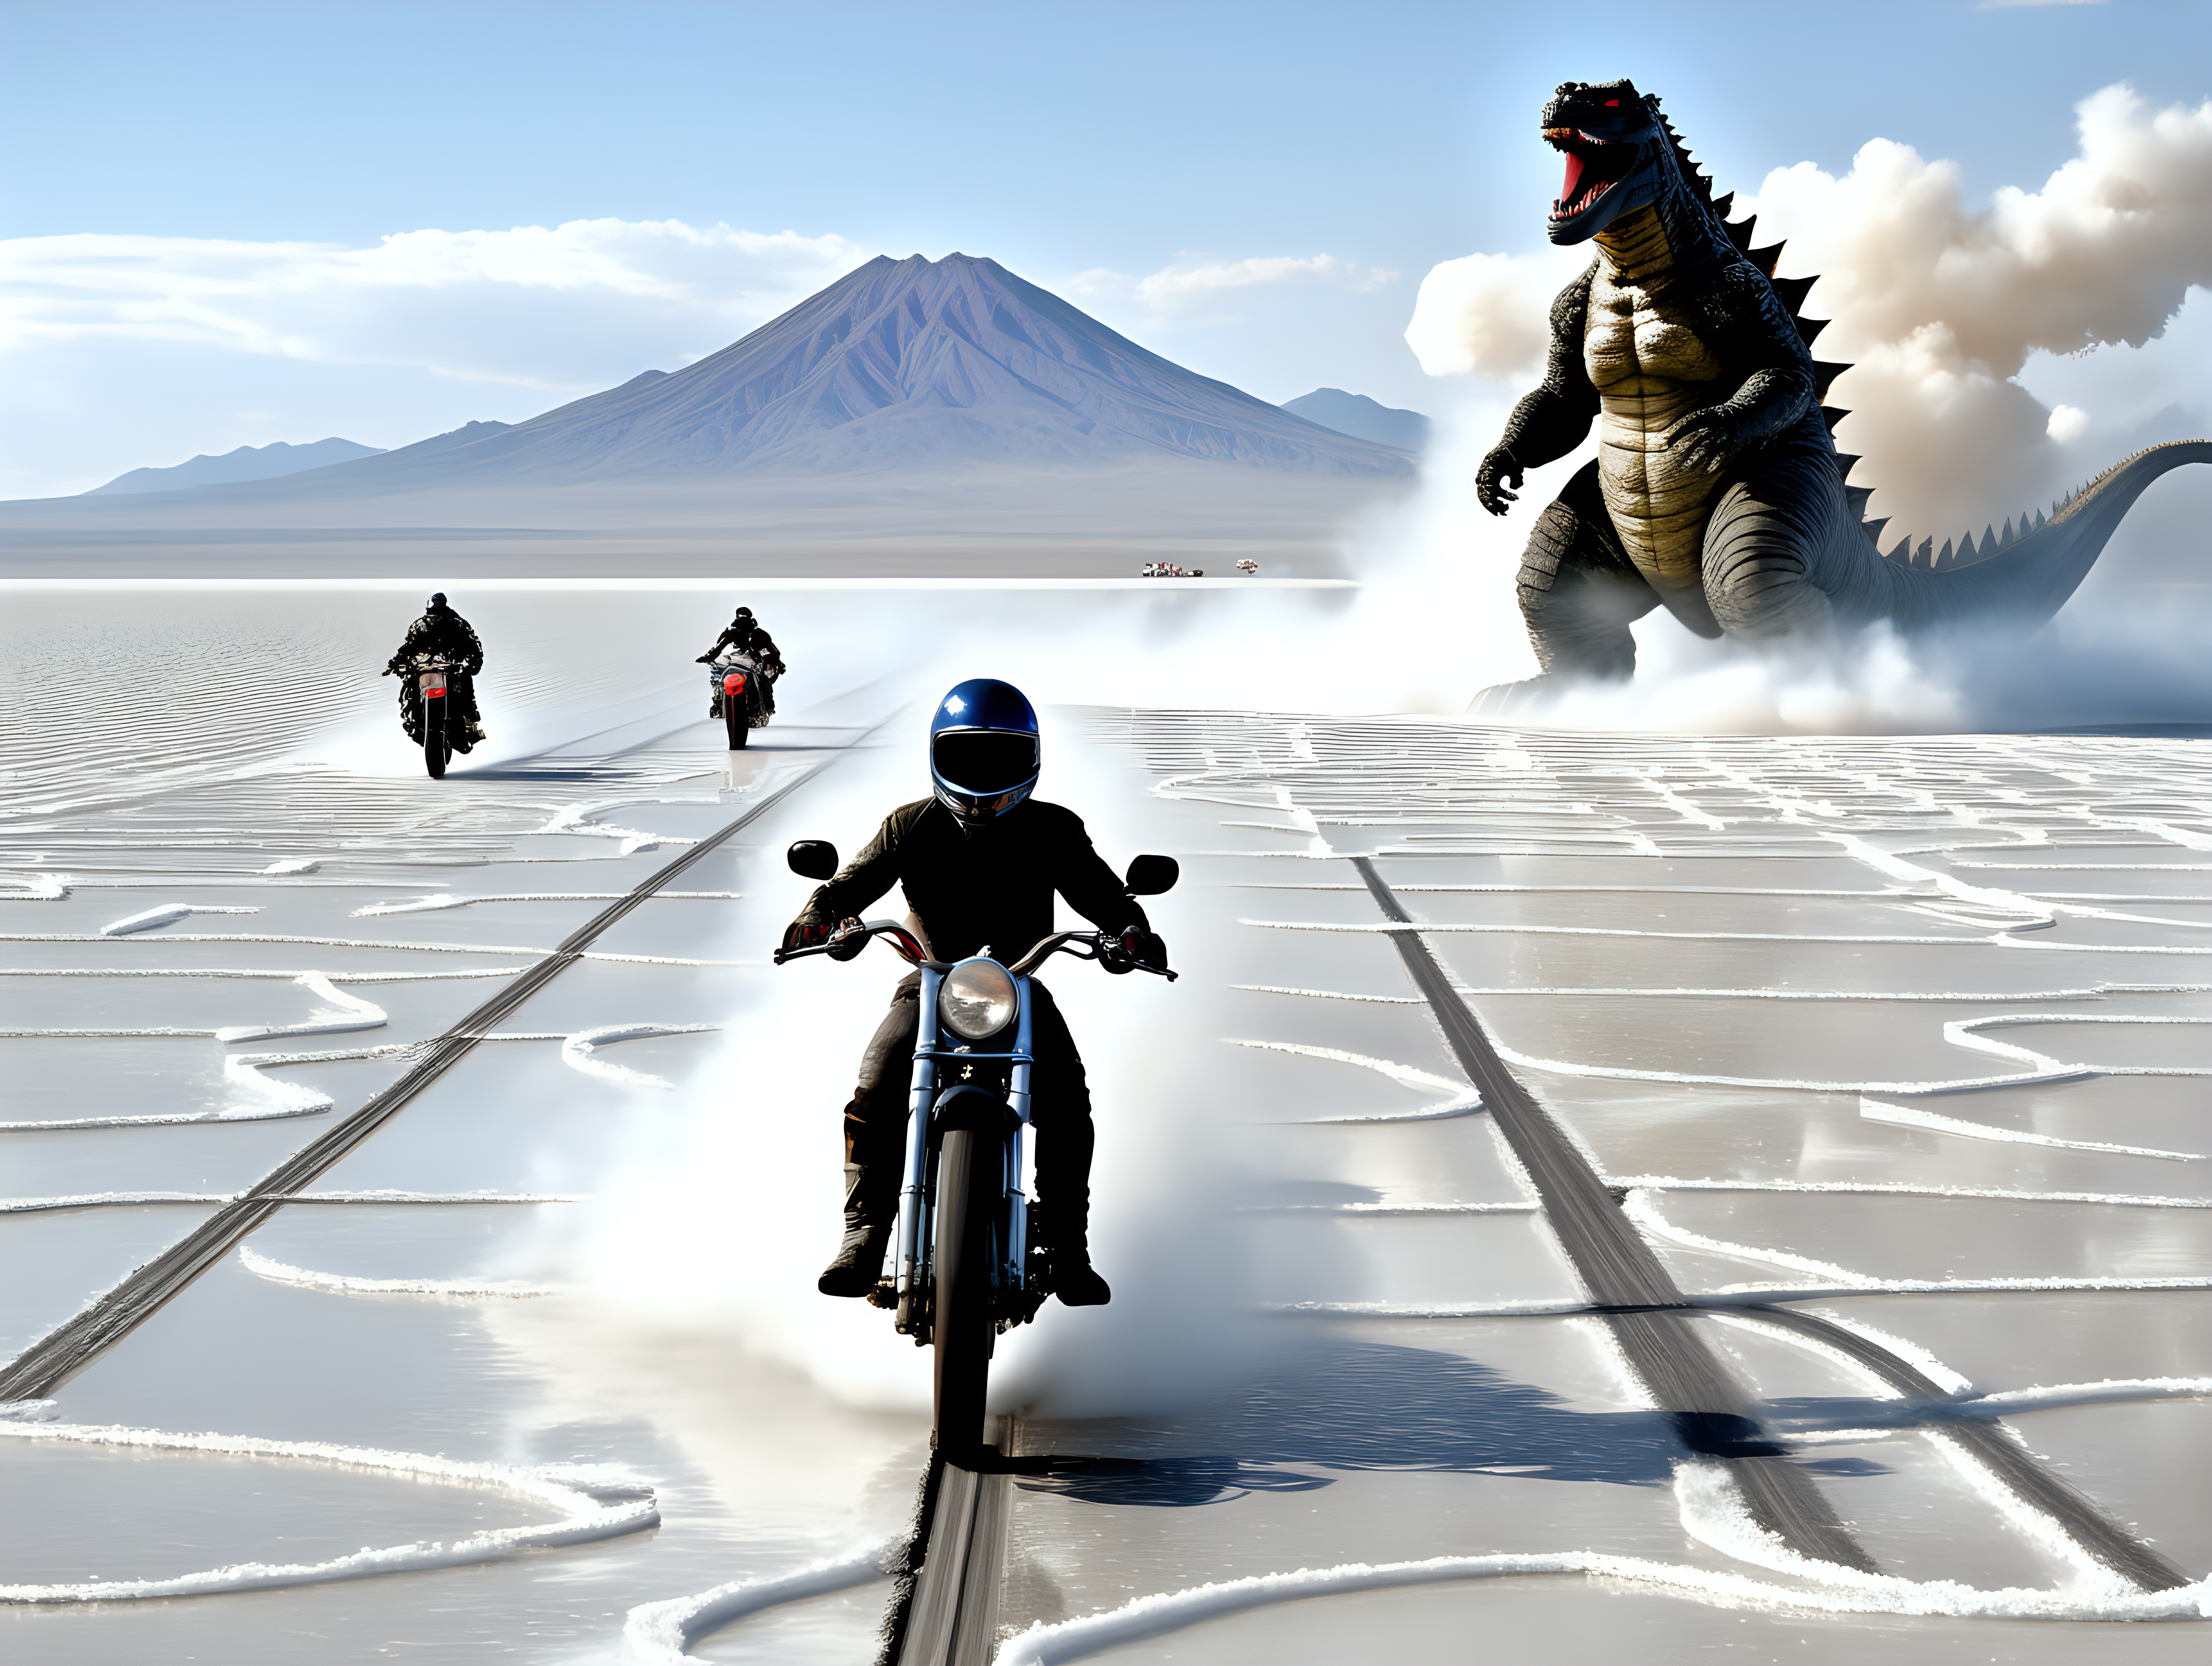 Motorcycles race on salt flats chased by Godzilla